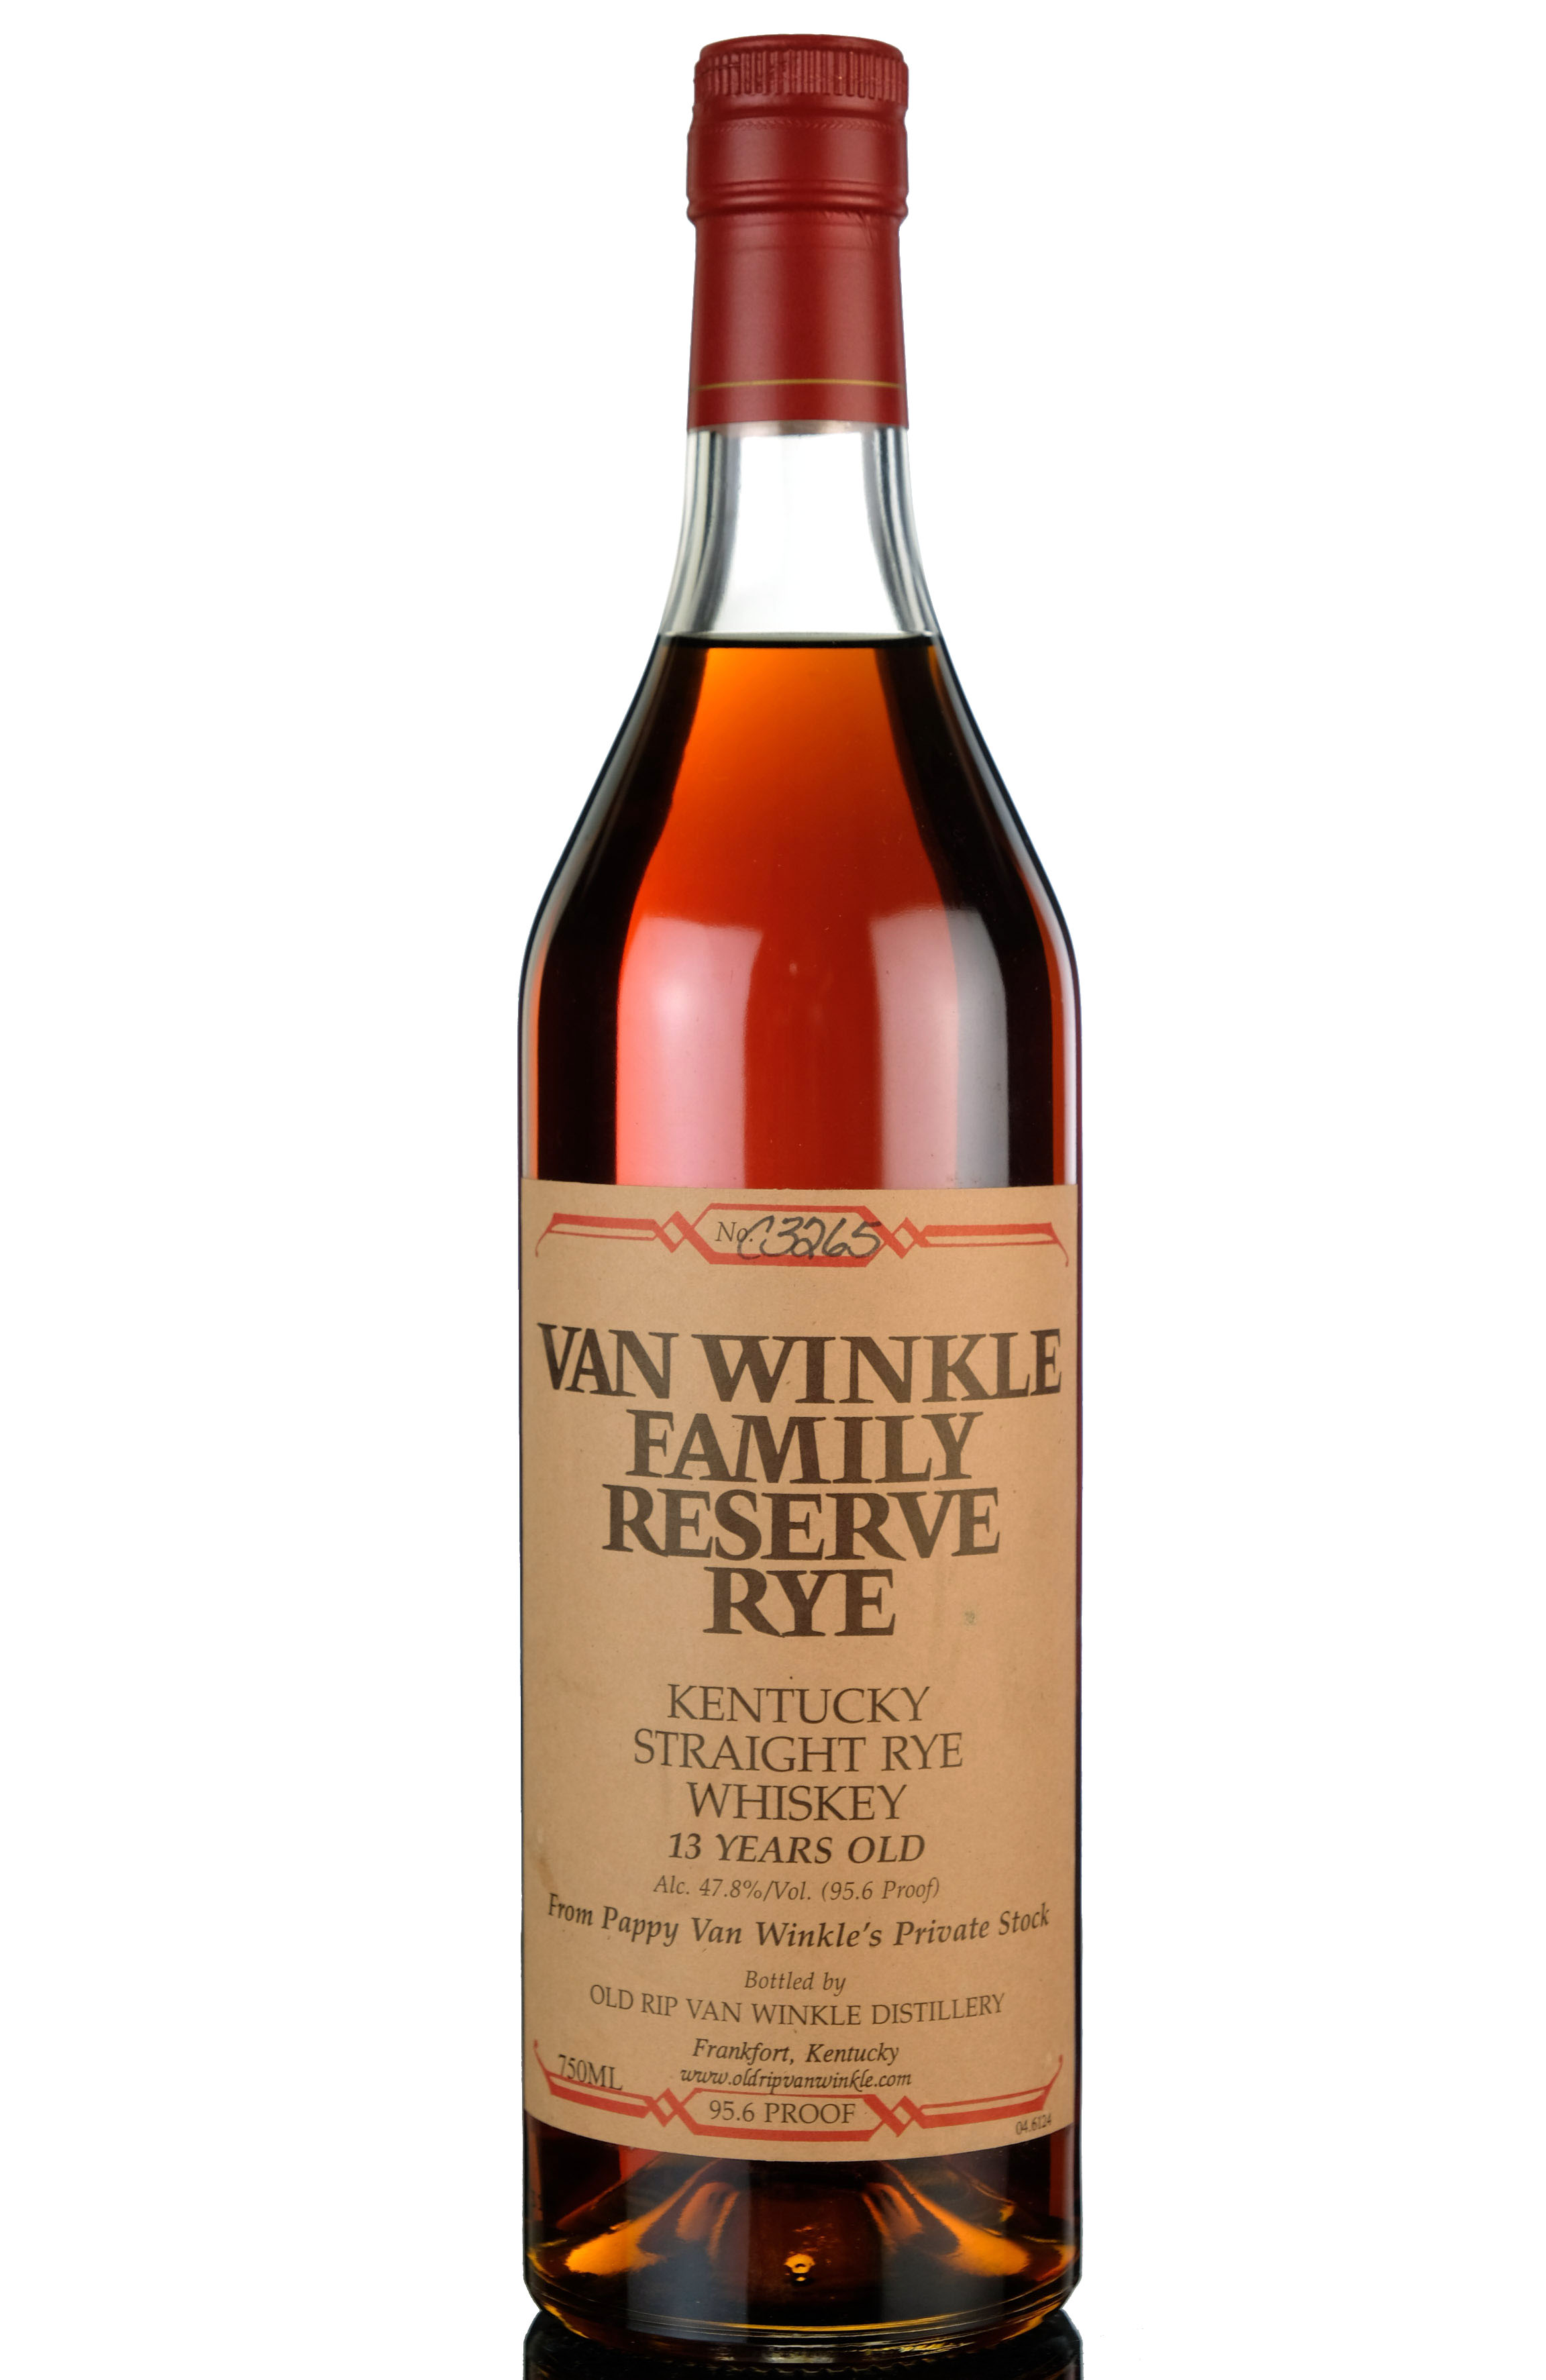 Pappy Van Winkle Family Reserve - 13 Year Old - Kentucky Straight Rye Whiskey